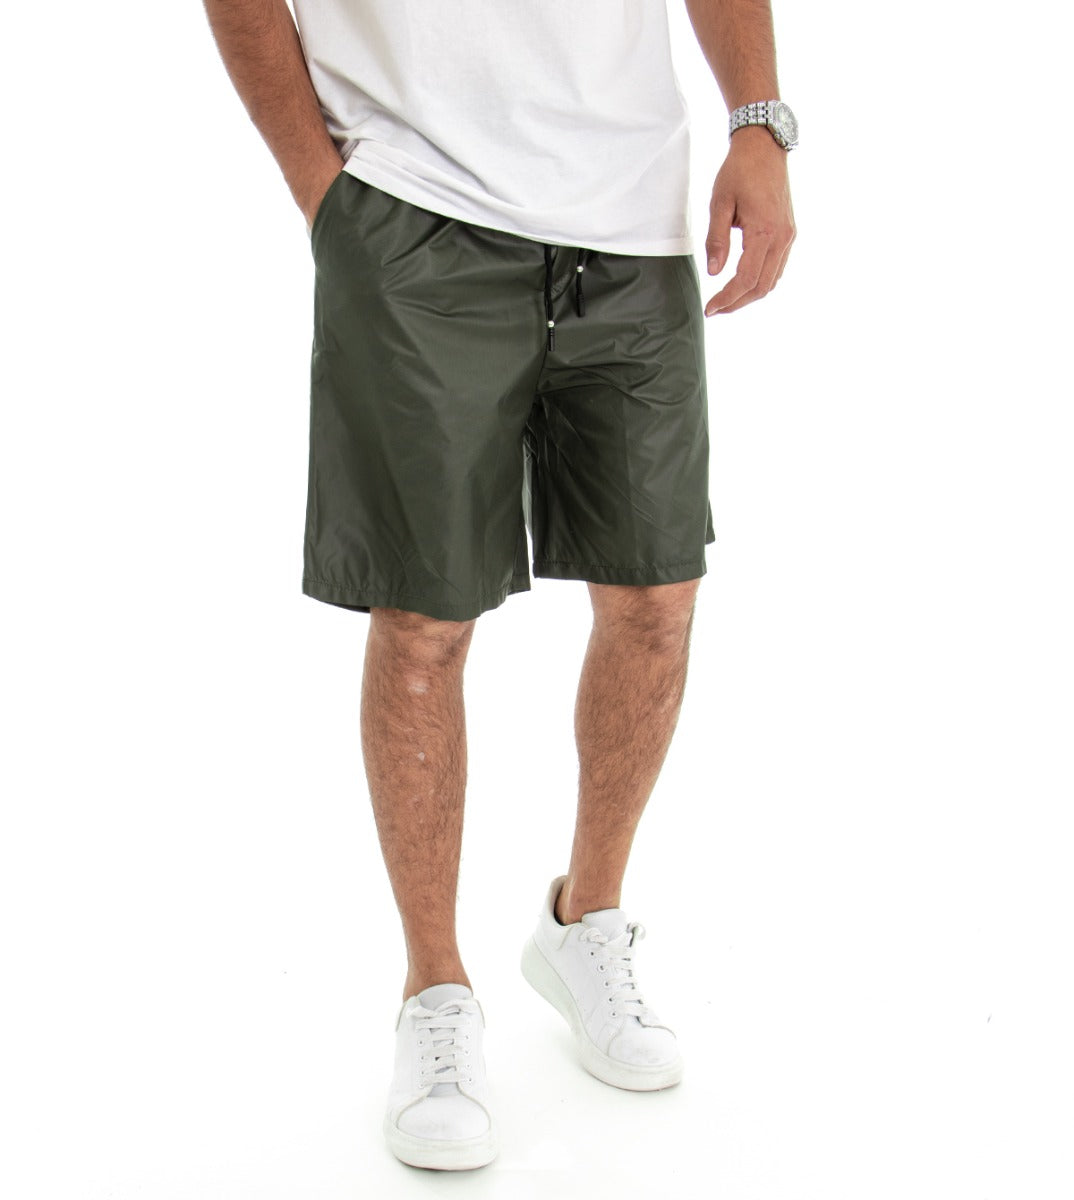 Men's Bermuda Shorts Over Solid Color Green GIOSAL-PC1485A